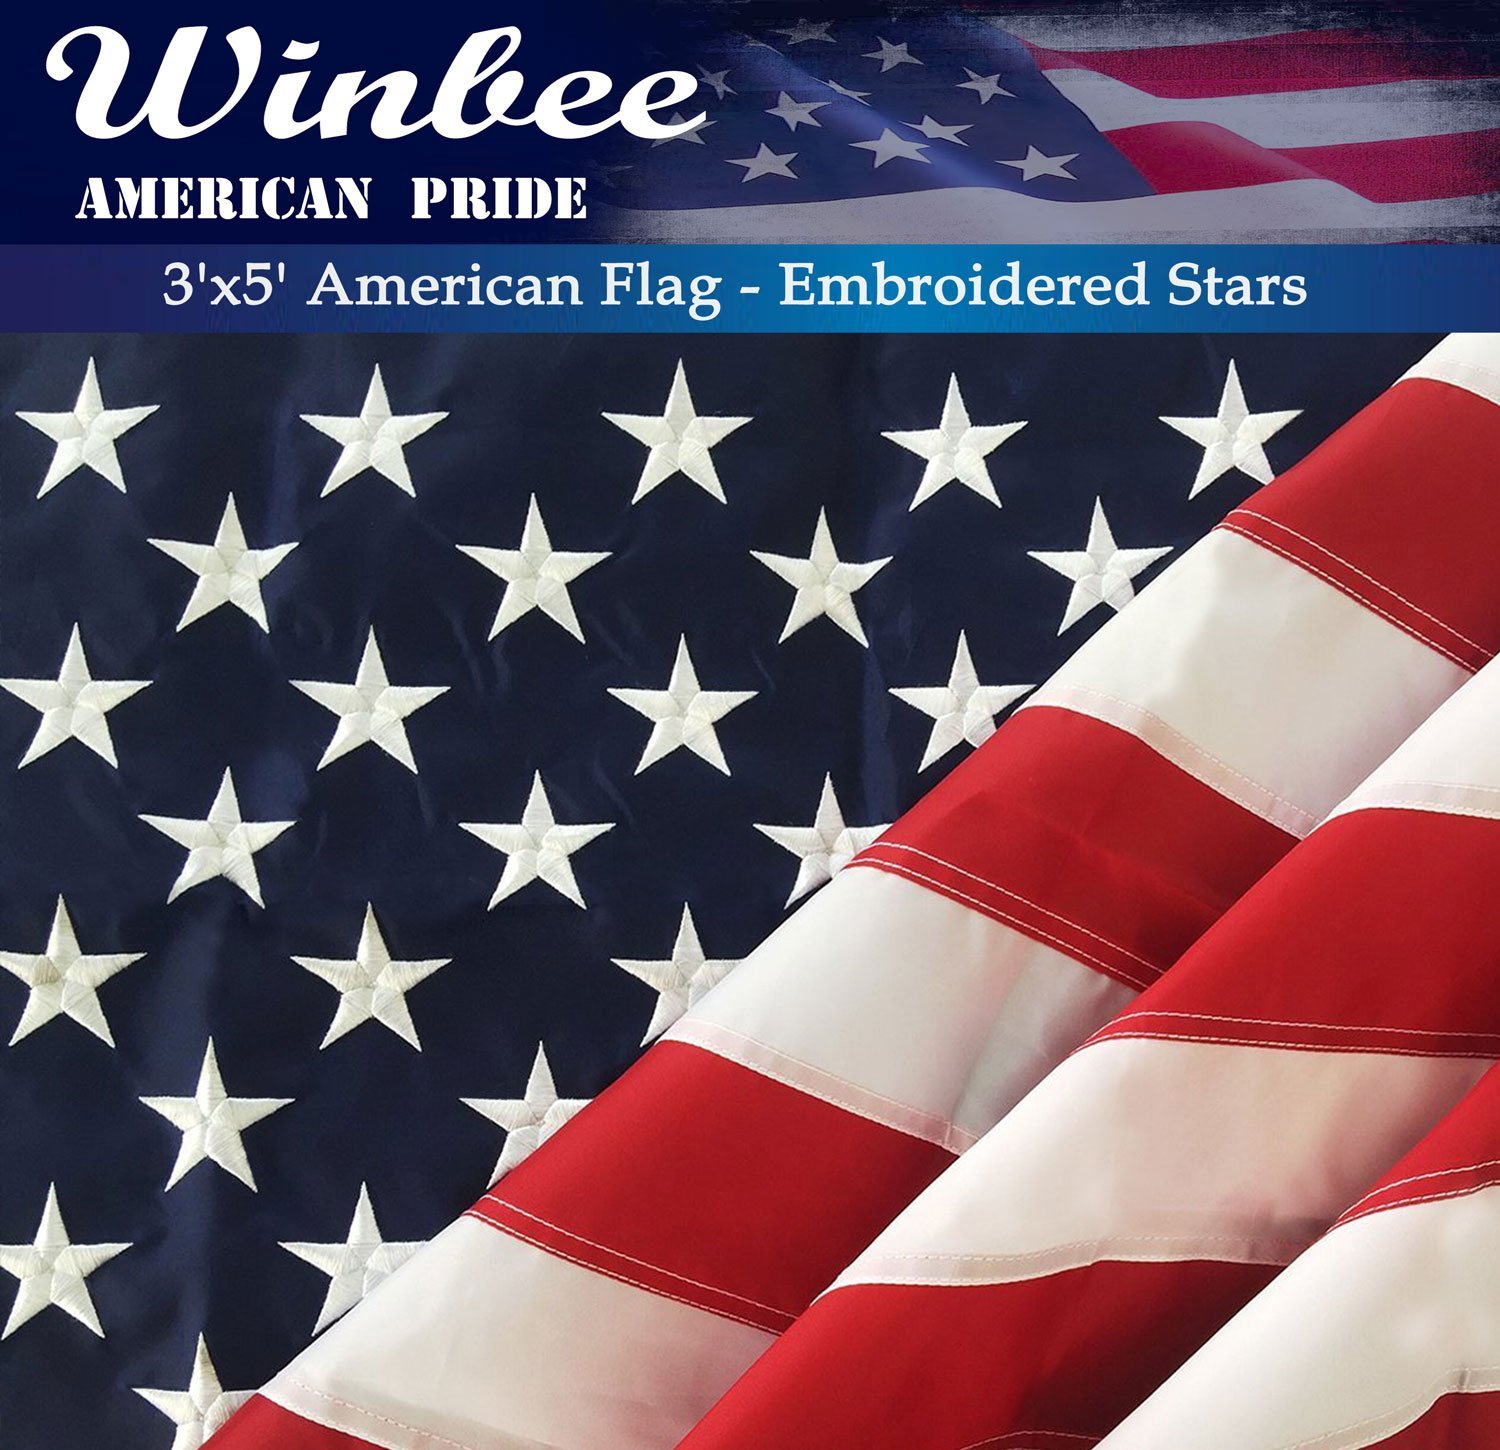 Amazon.com : Winbee American Flag 3x5 ft - Embroidered Stars and ...